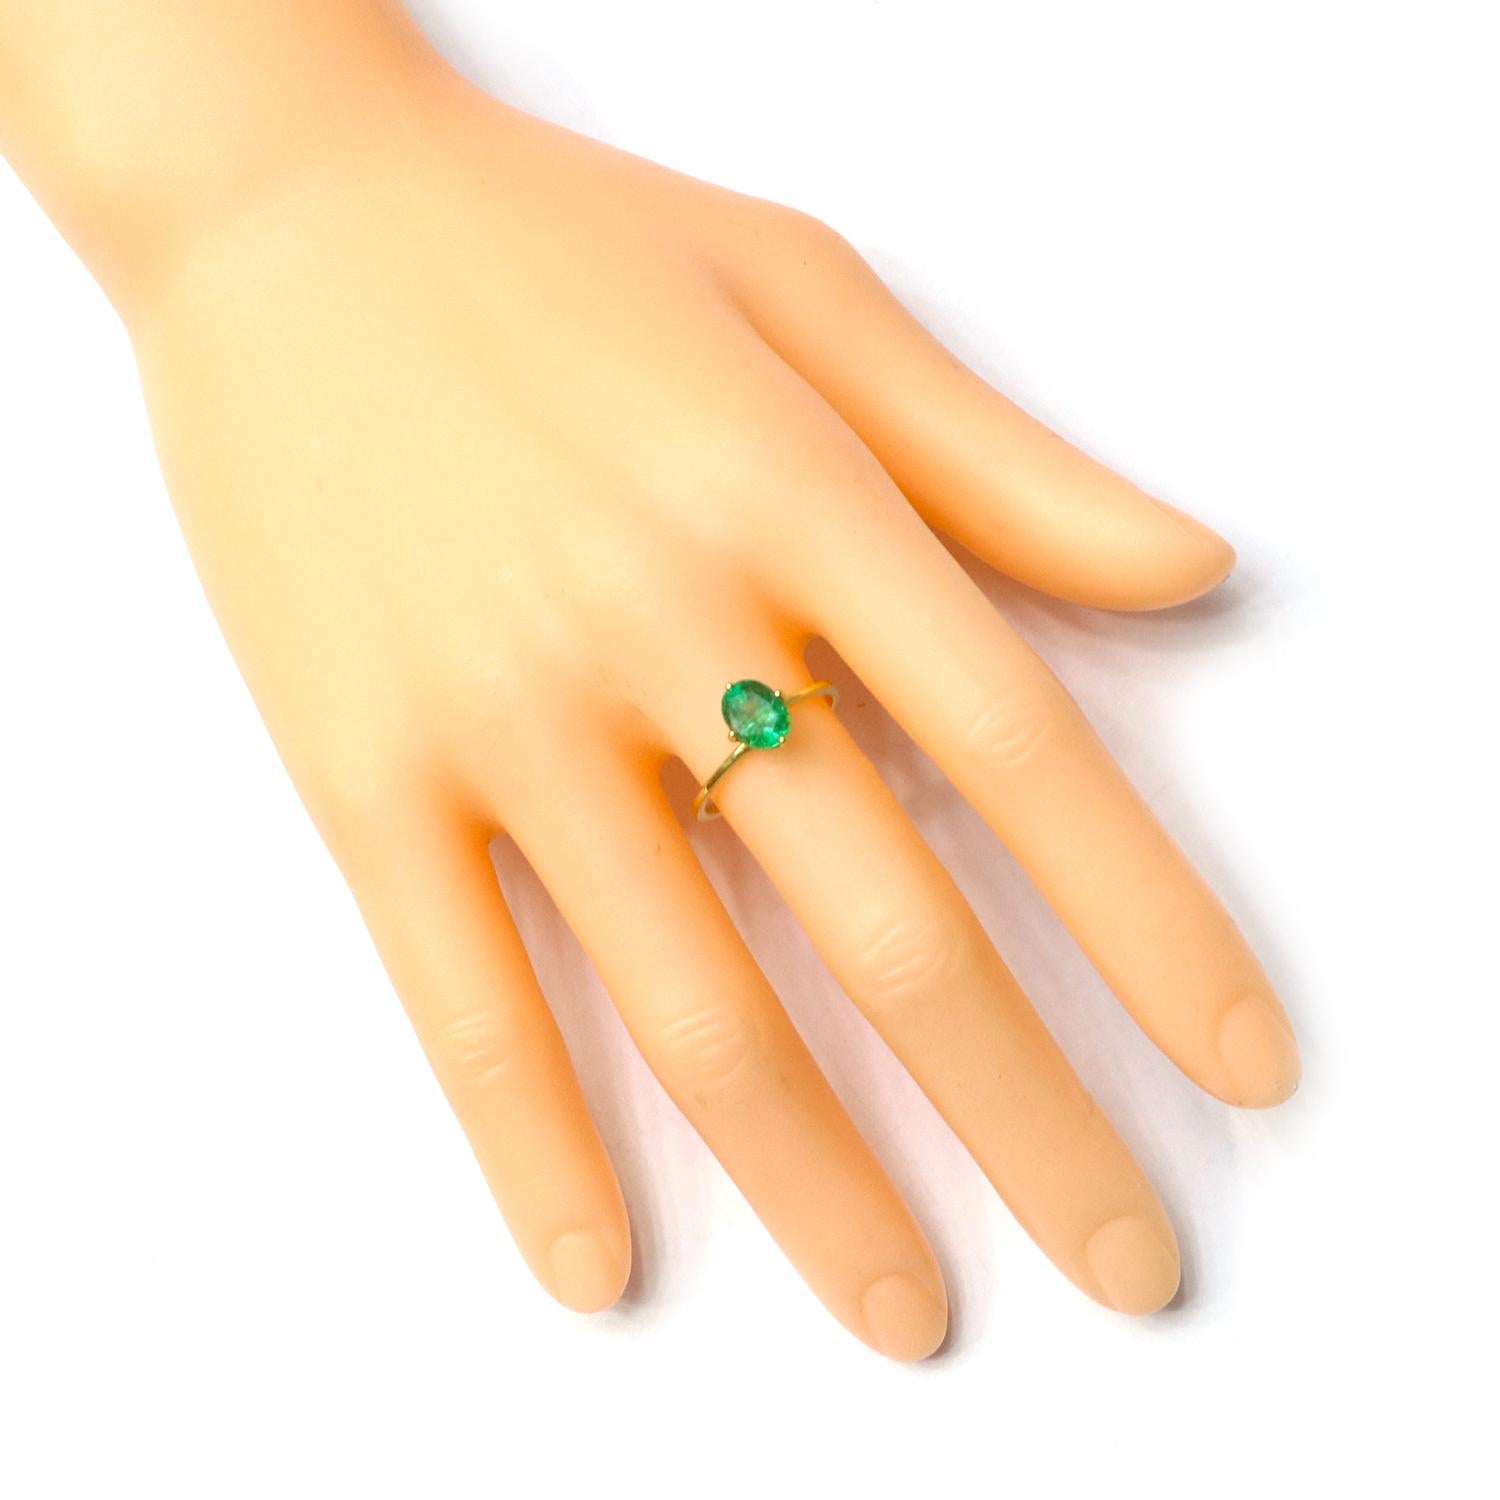 18 Karat Yellow Gold 1.25 Carat Natural Emerald Solitaire Ring in Four-Prong Setting

Classic, subtle and graceful, this ring is set to become your everyday wear. Featuring an Oval-Cut Natural Emerald encrusted in the center with a four-prong